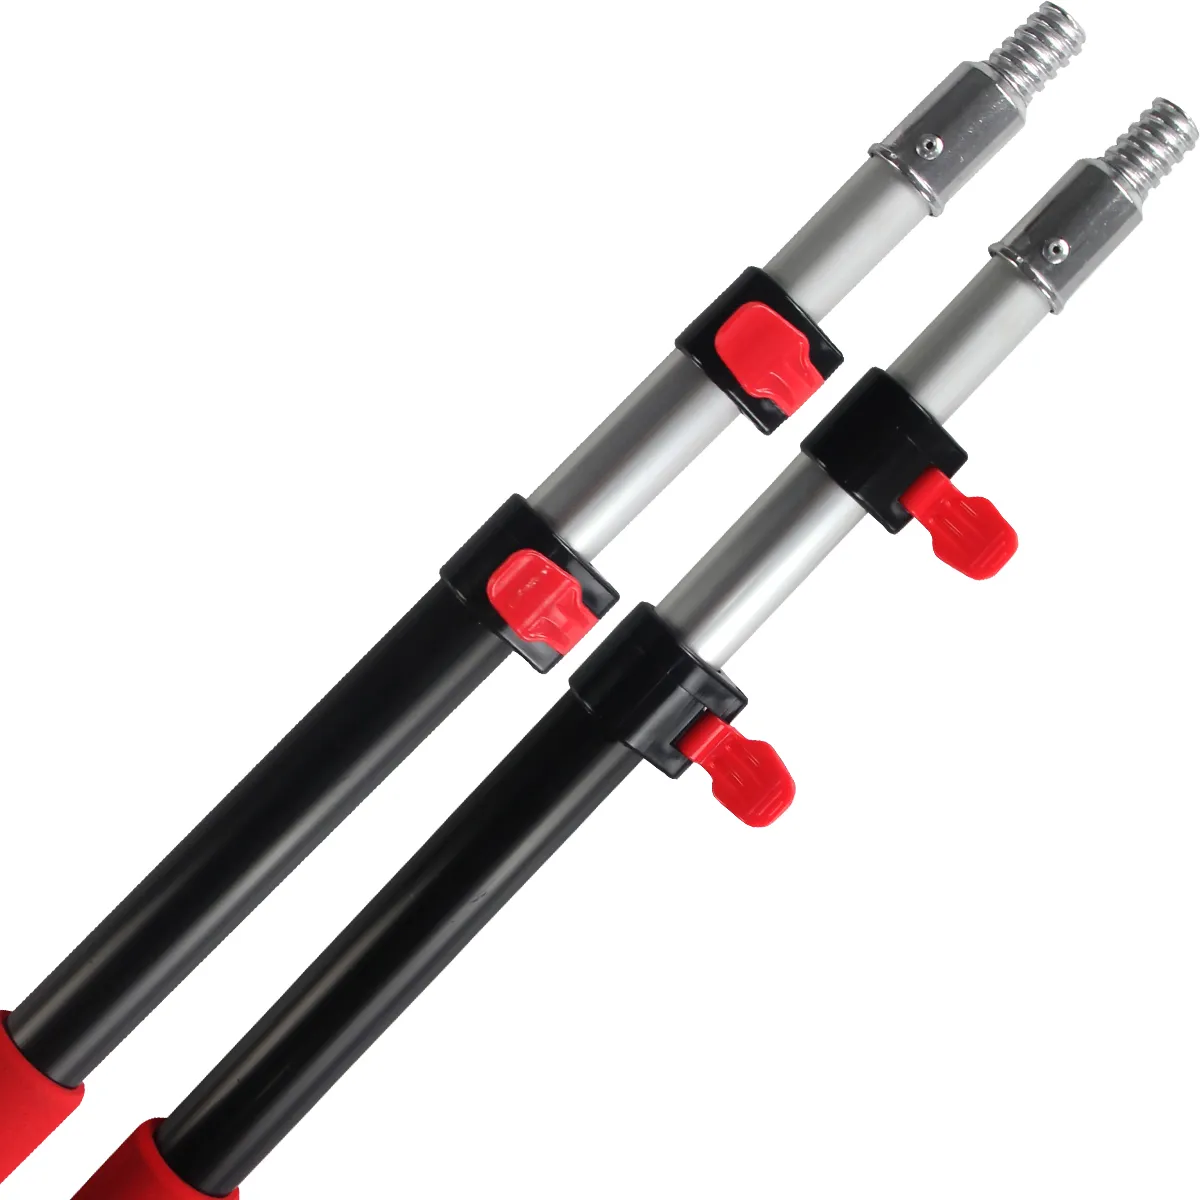 What Are the Advantages of Telescopic Poles